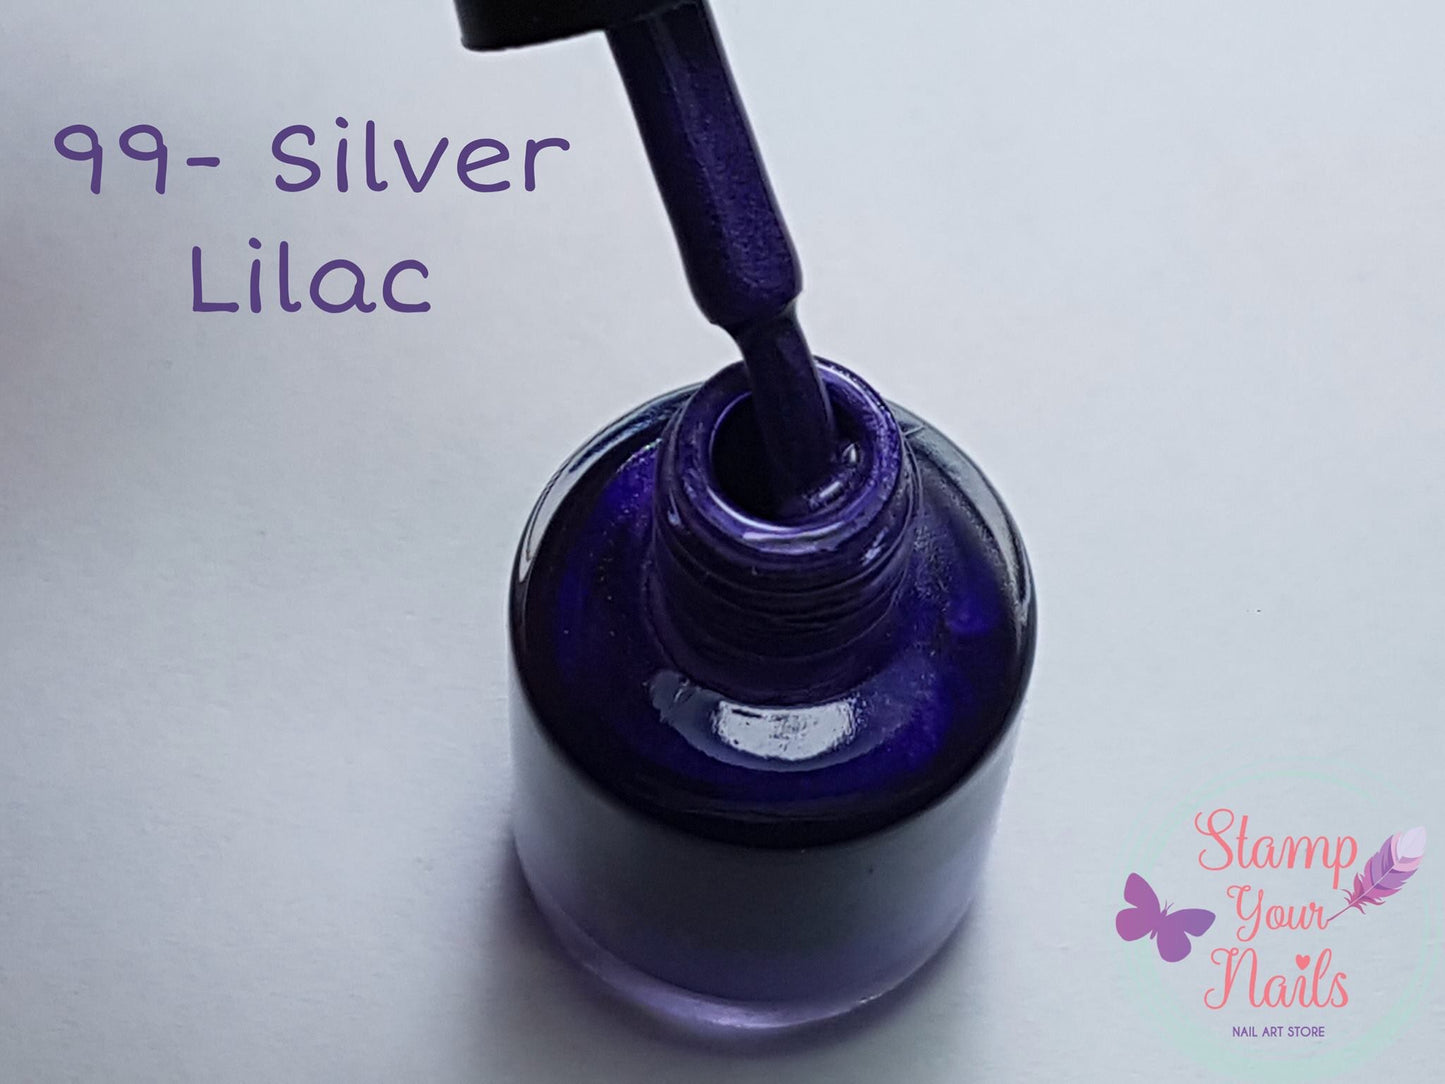 99 Silver Lilac - Stamp your nails